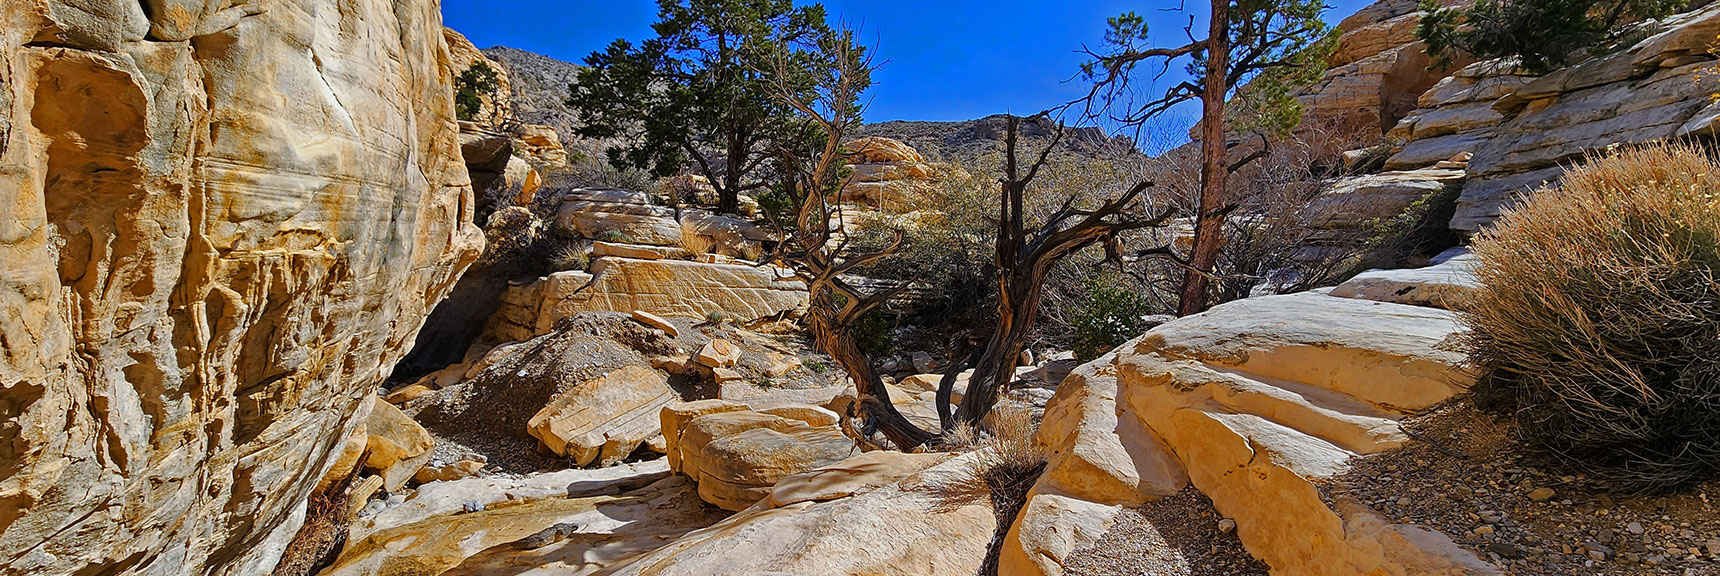 Sandstone, Flowing Water and Pine Trees Make for Incredible Beauty | Ash Canyon to Calico Tanks | Calico Basin and Red Rock Canyon, Nevada | David Smith | Las Vegas Area Trails